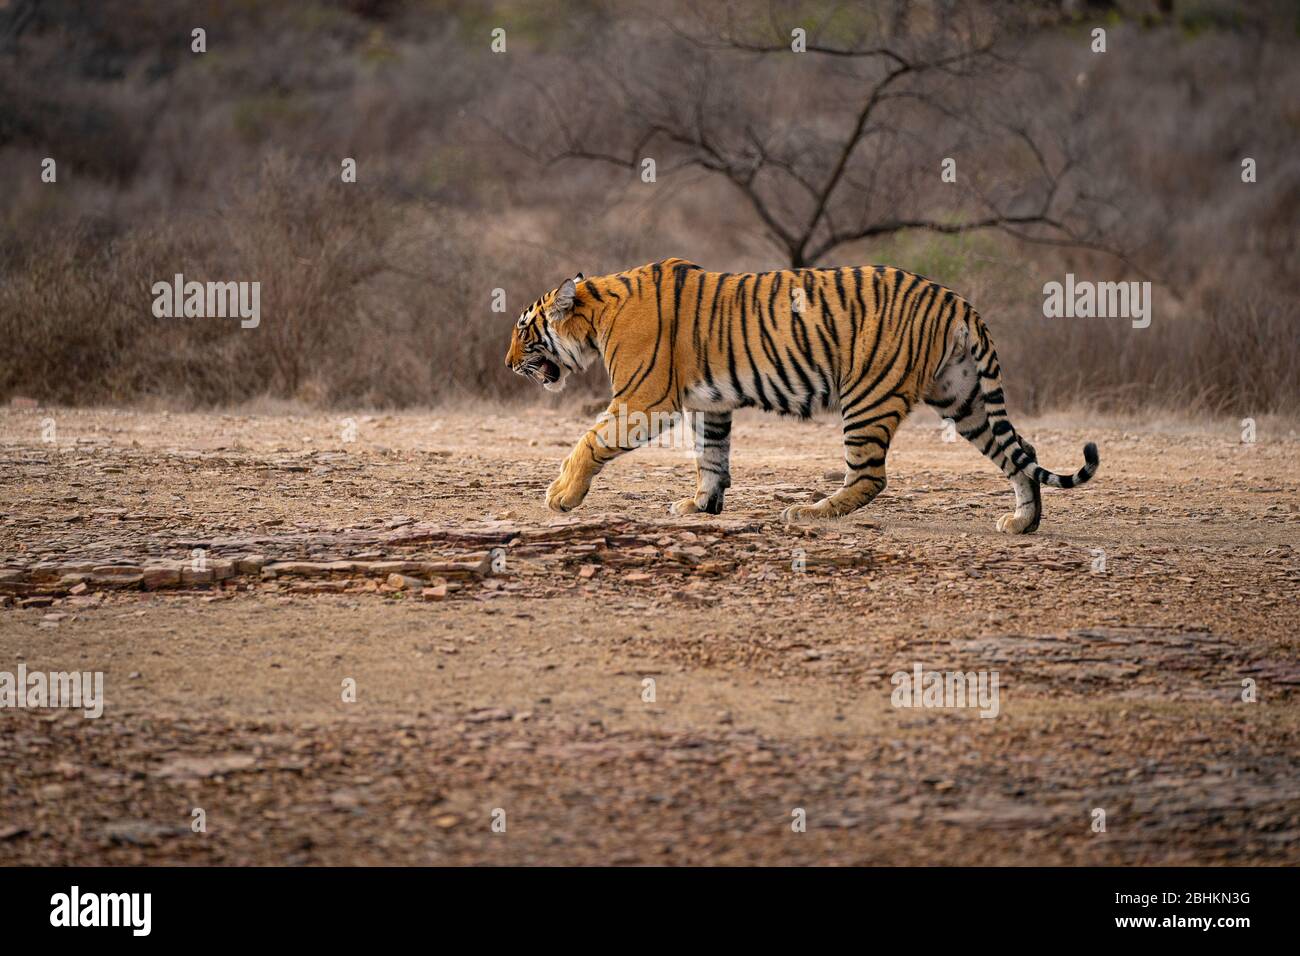 Young tiger in natural habitat, walking in scrub in India. National Park with beautiful Indian tiger. Stock Photo